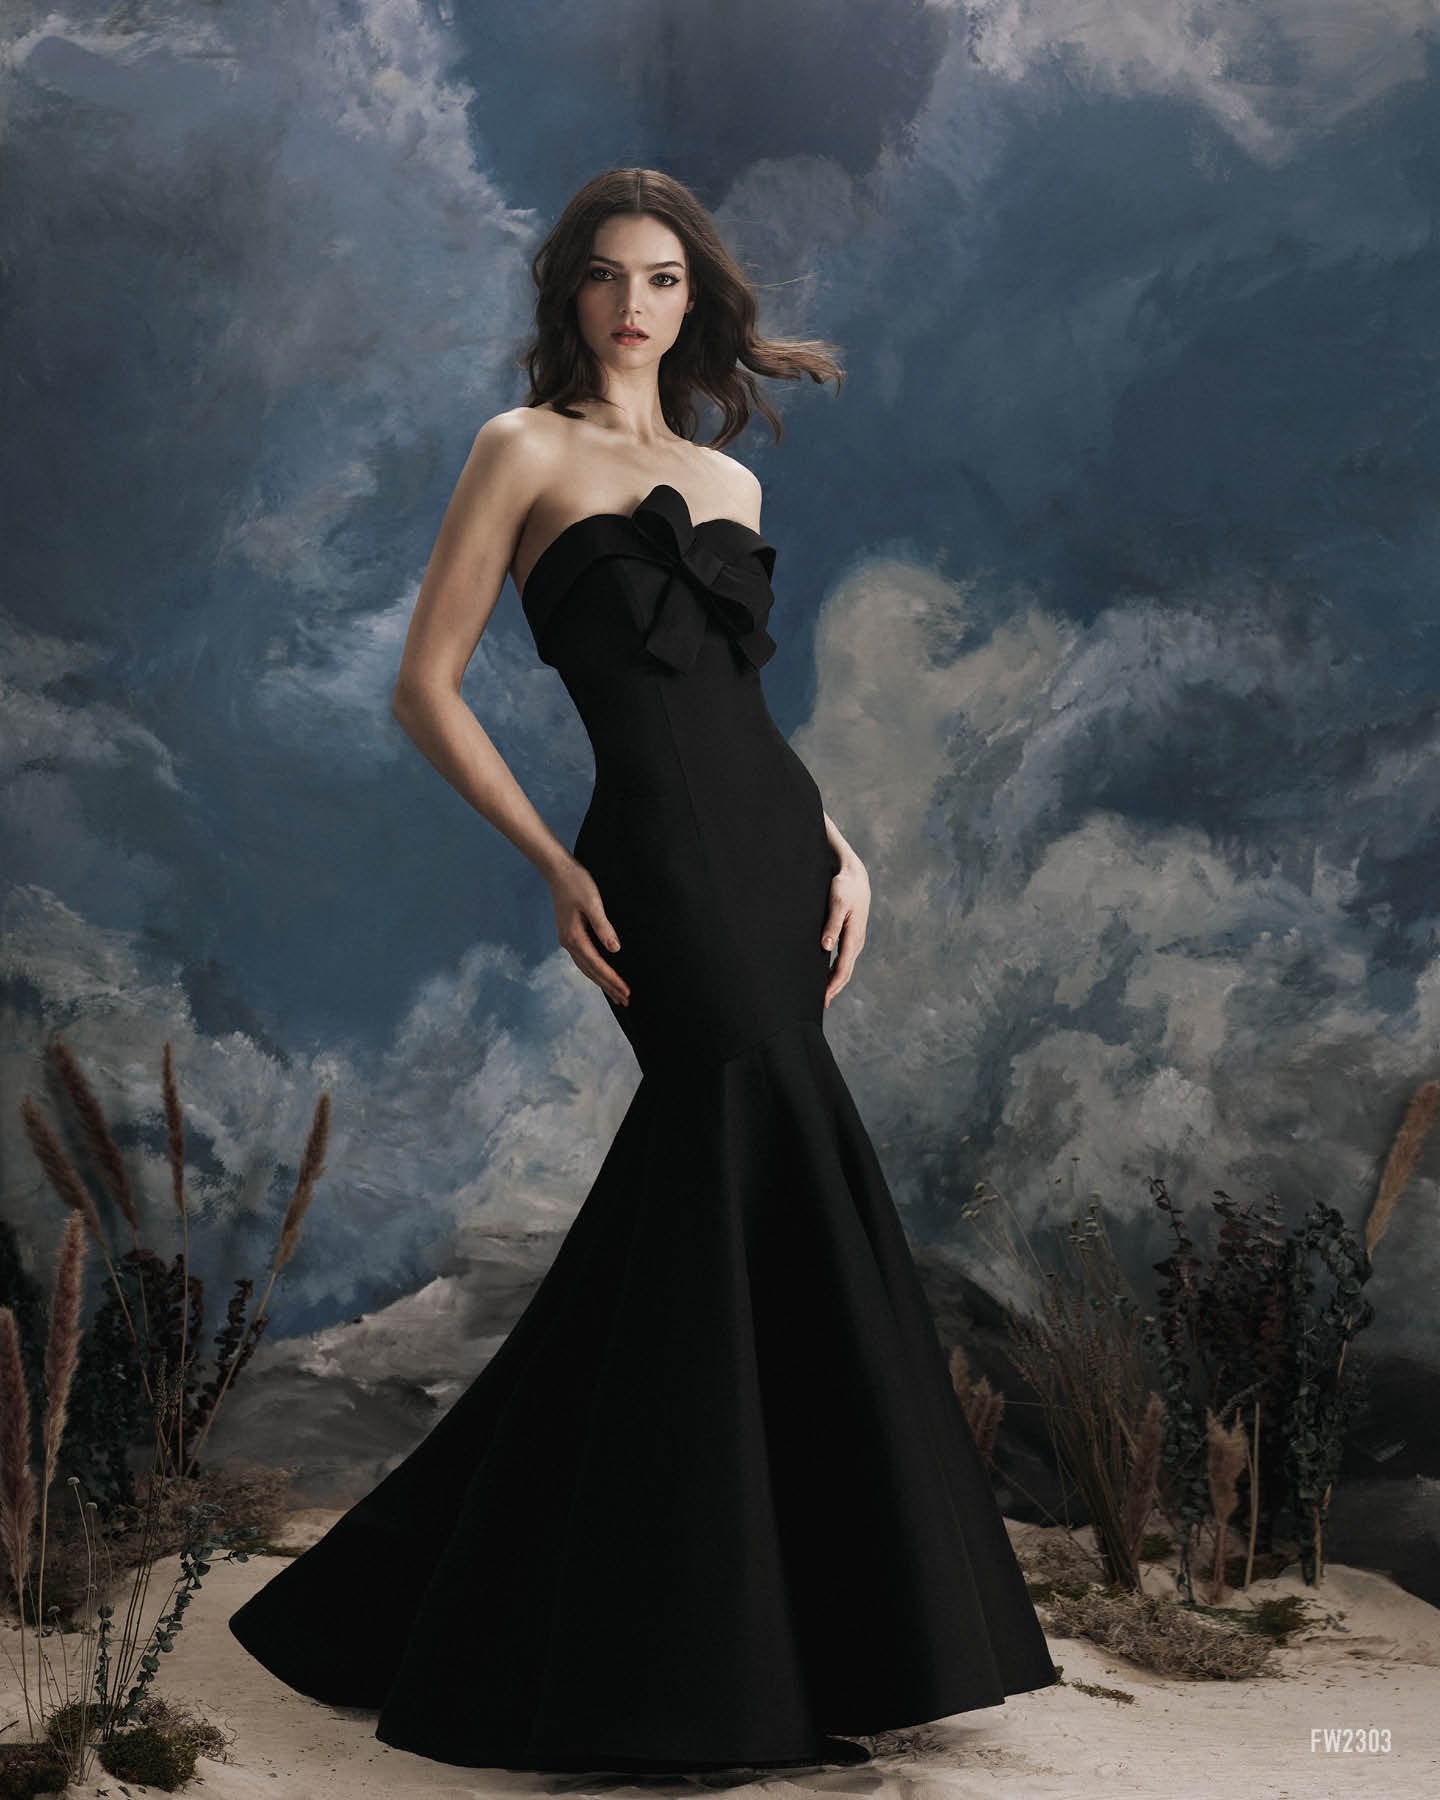 Lucian Matis Strapless Black Evening Gown with Double Bows EVENING DRESSES, LONG DRESS, MOTHER OF THE BRIDE DRESS, MOTHER OF THE GROOM DRESS, WEDDING GUEST DRESSES, Long Island, New York, Mother of the Bride gowns near me Woodbury Greenvale Mother of the Bride dresses Bat Mitzvah Bar Mitzvah, Evening Wear Wedding Wear.